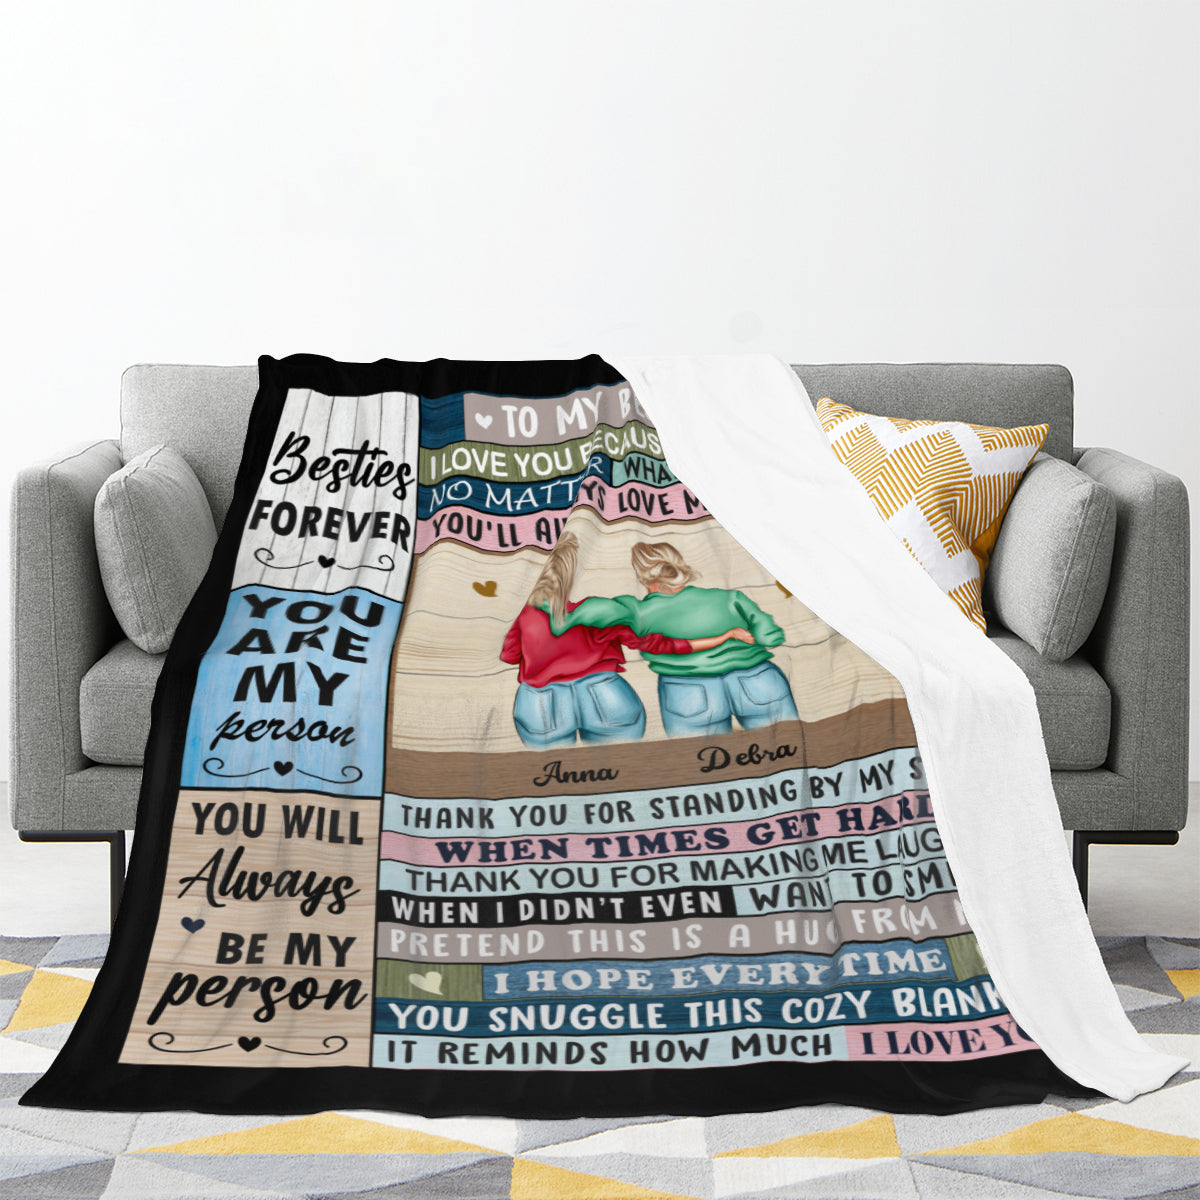 Bestie Forever, You Are My Person - Custom Blanket for Besties